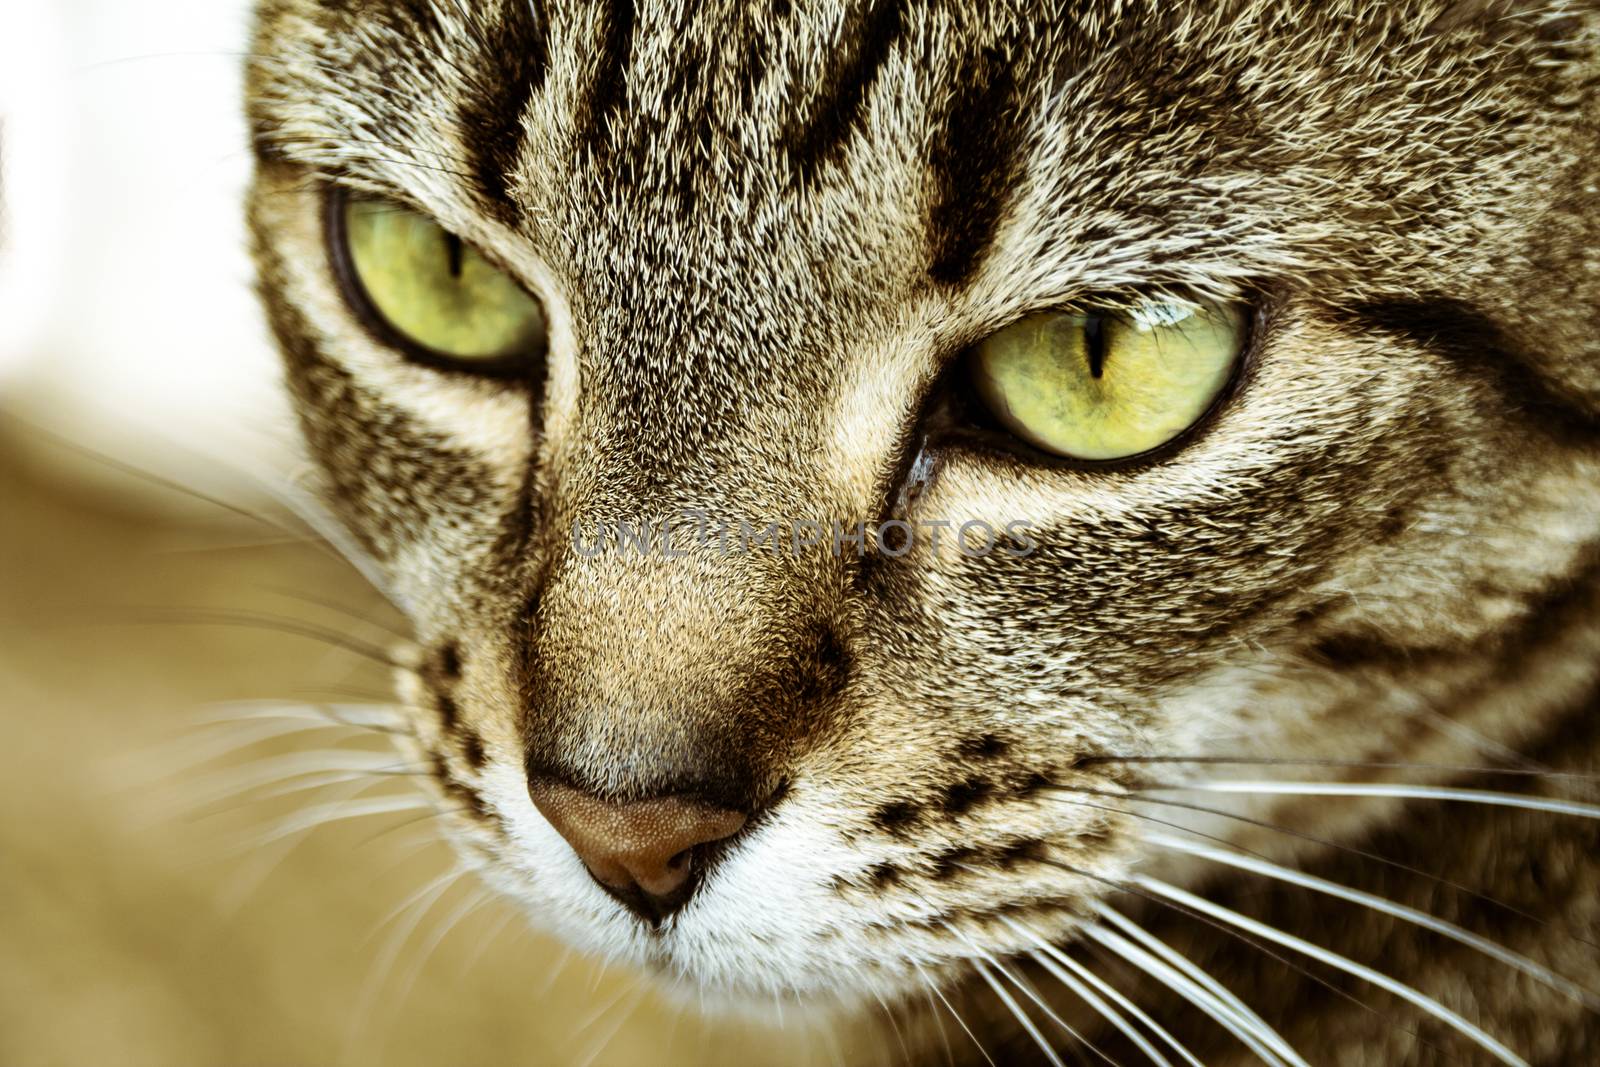 a close up shot of a striped cats face showing its green eyes and detail of fur